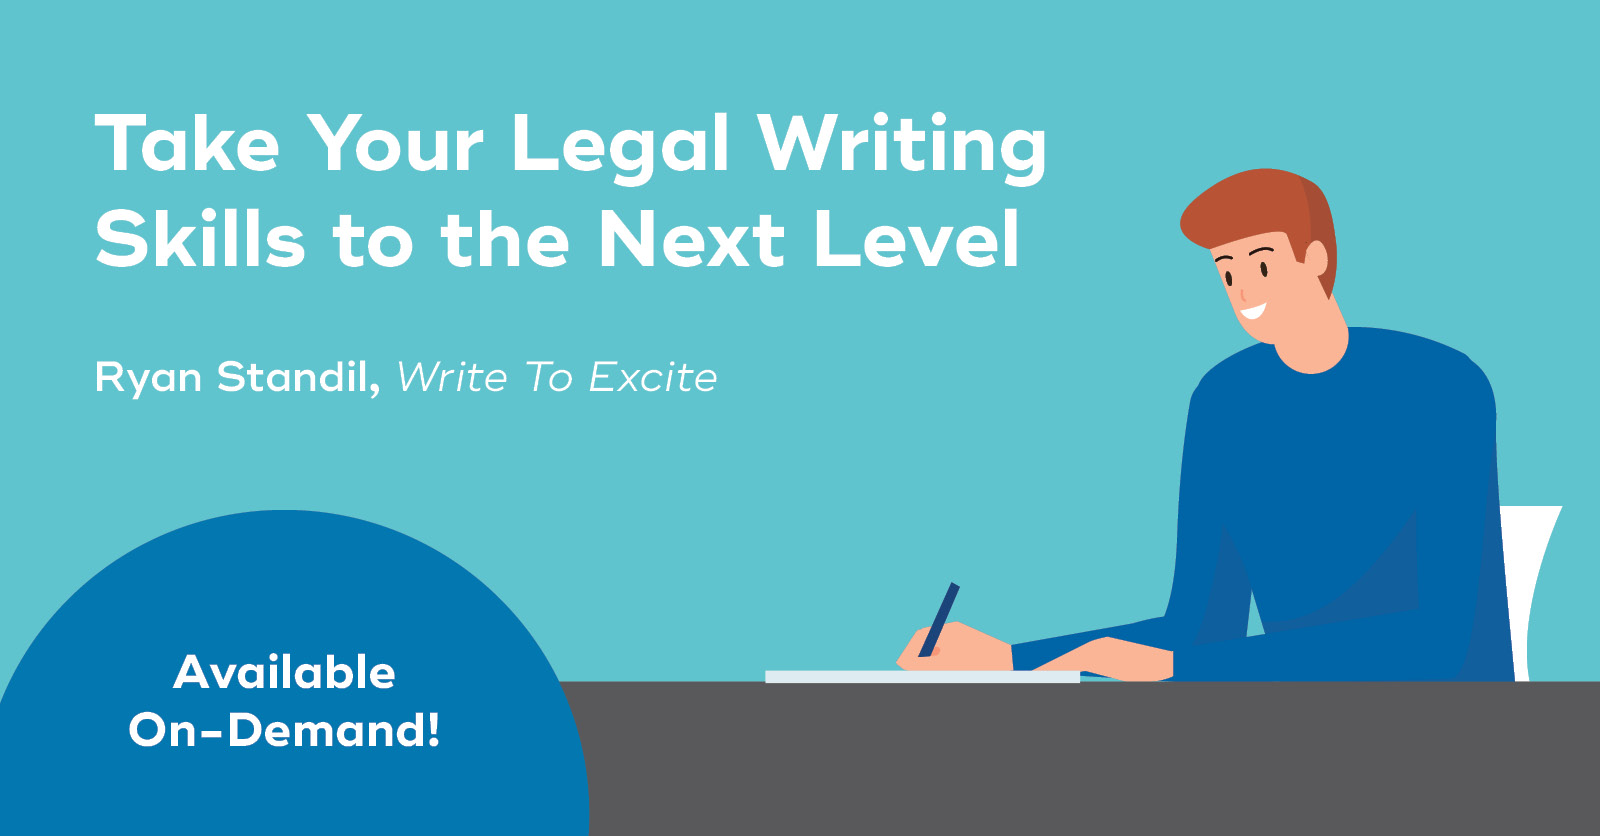 Take Your Legal Writing Skills to the Next Level